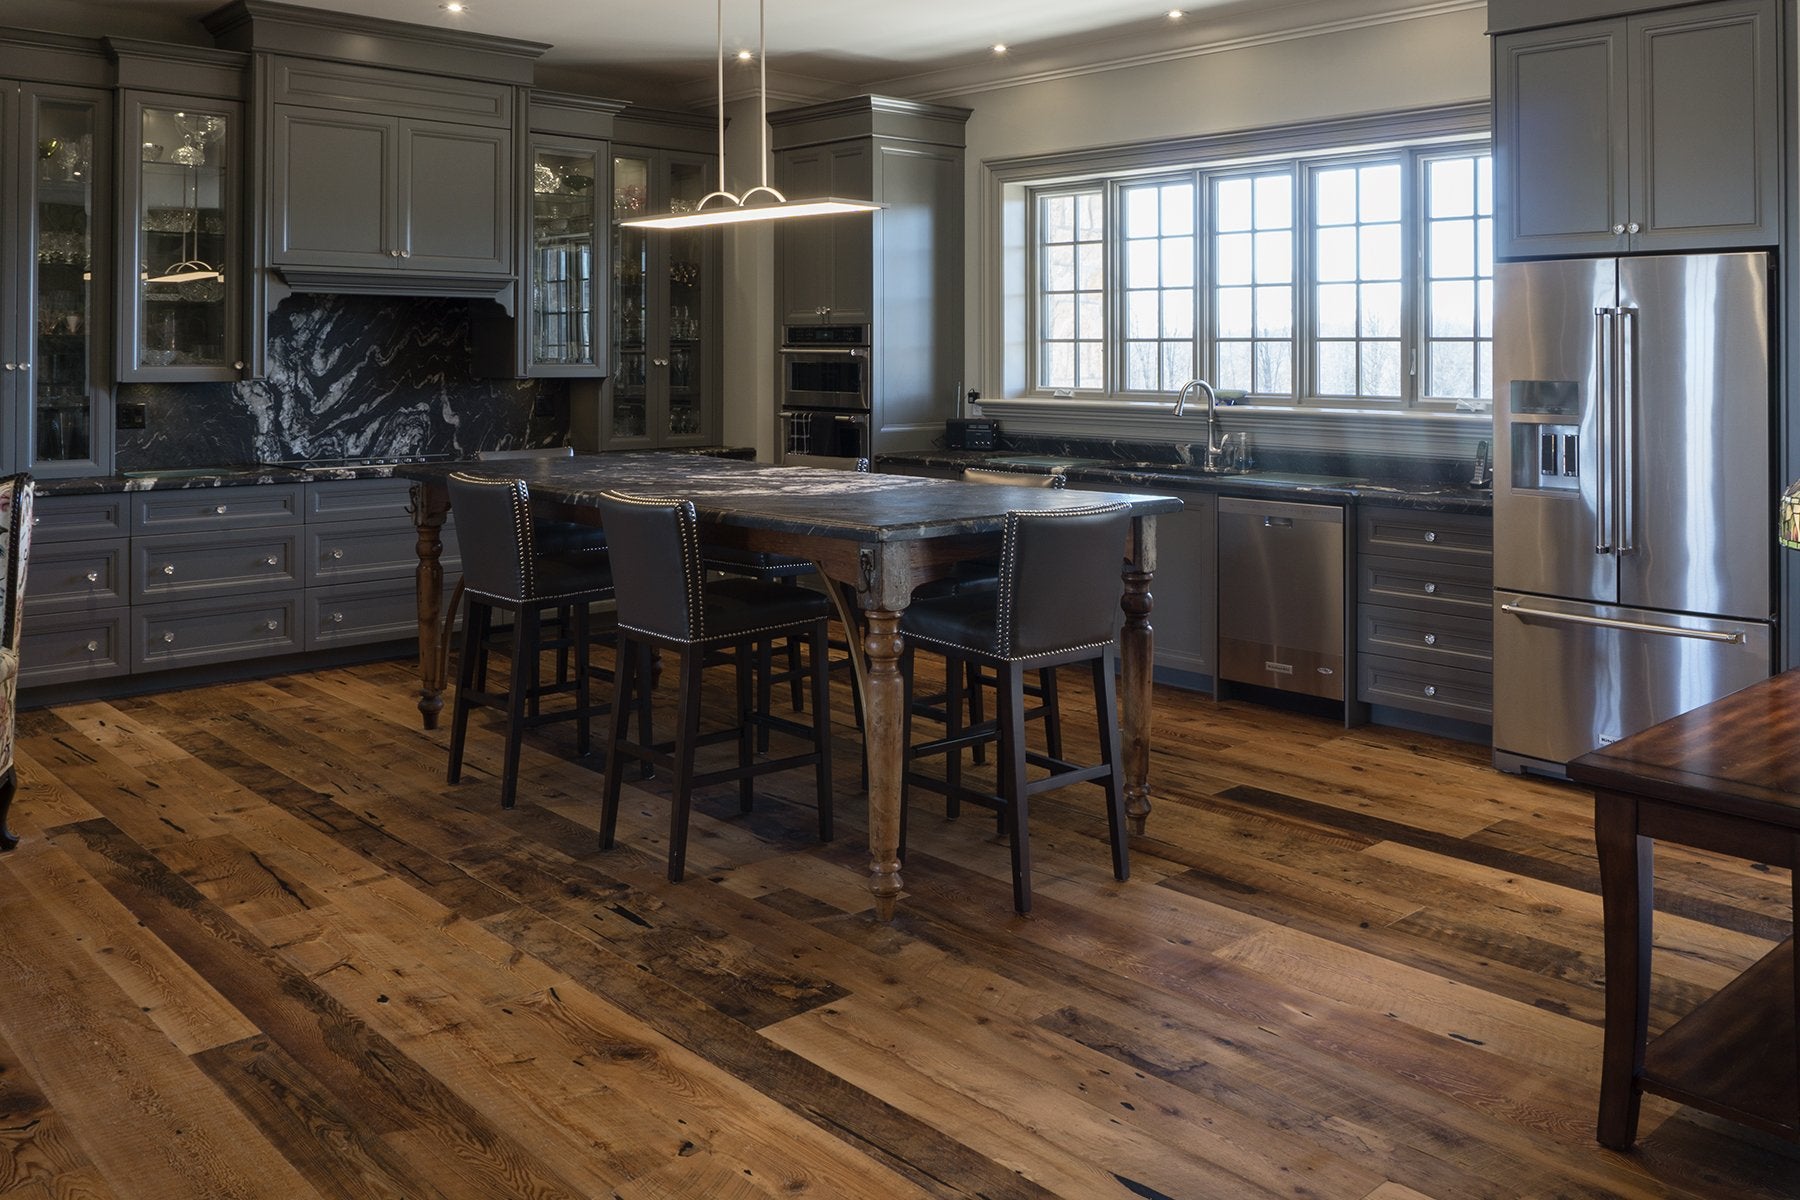 When to Use Wood Floors in The Kitchen